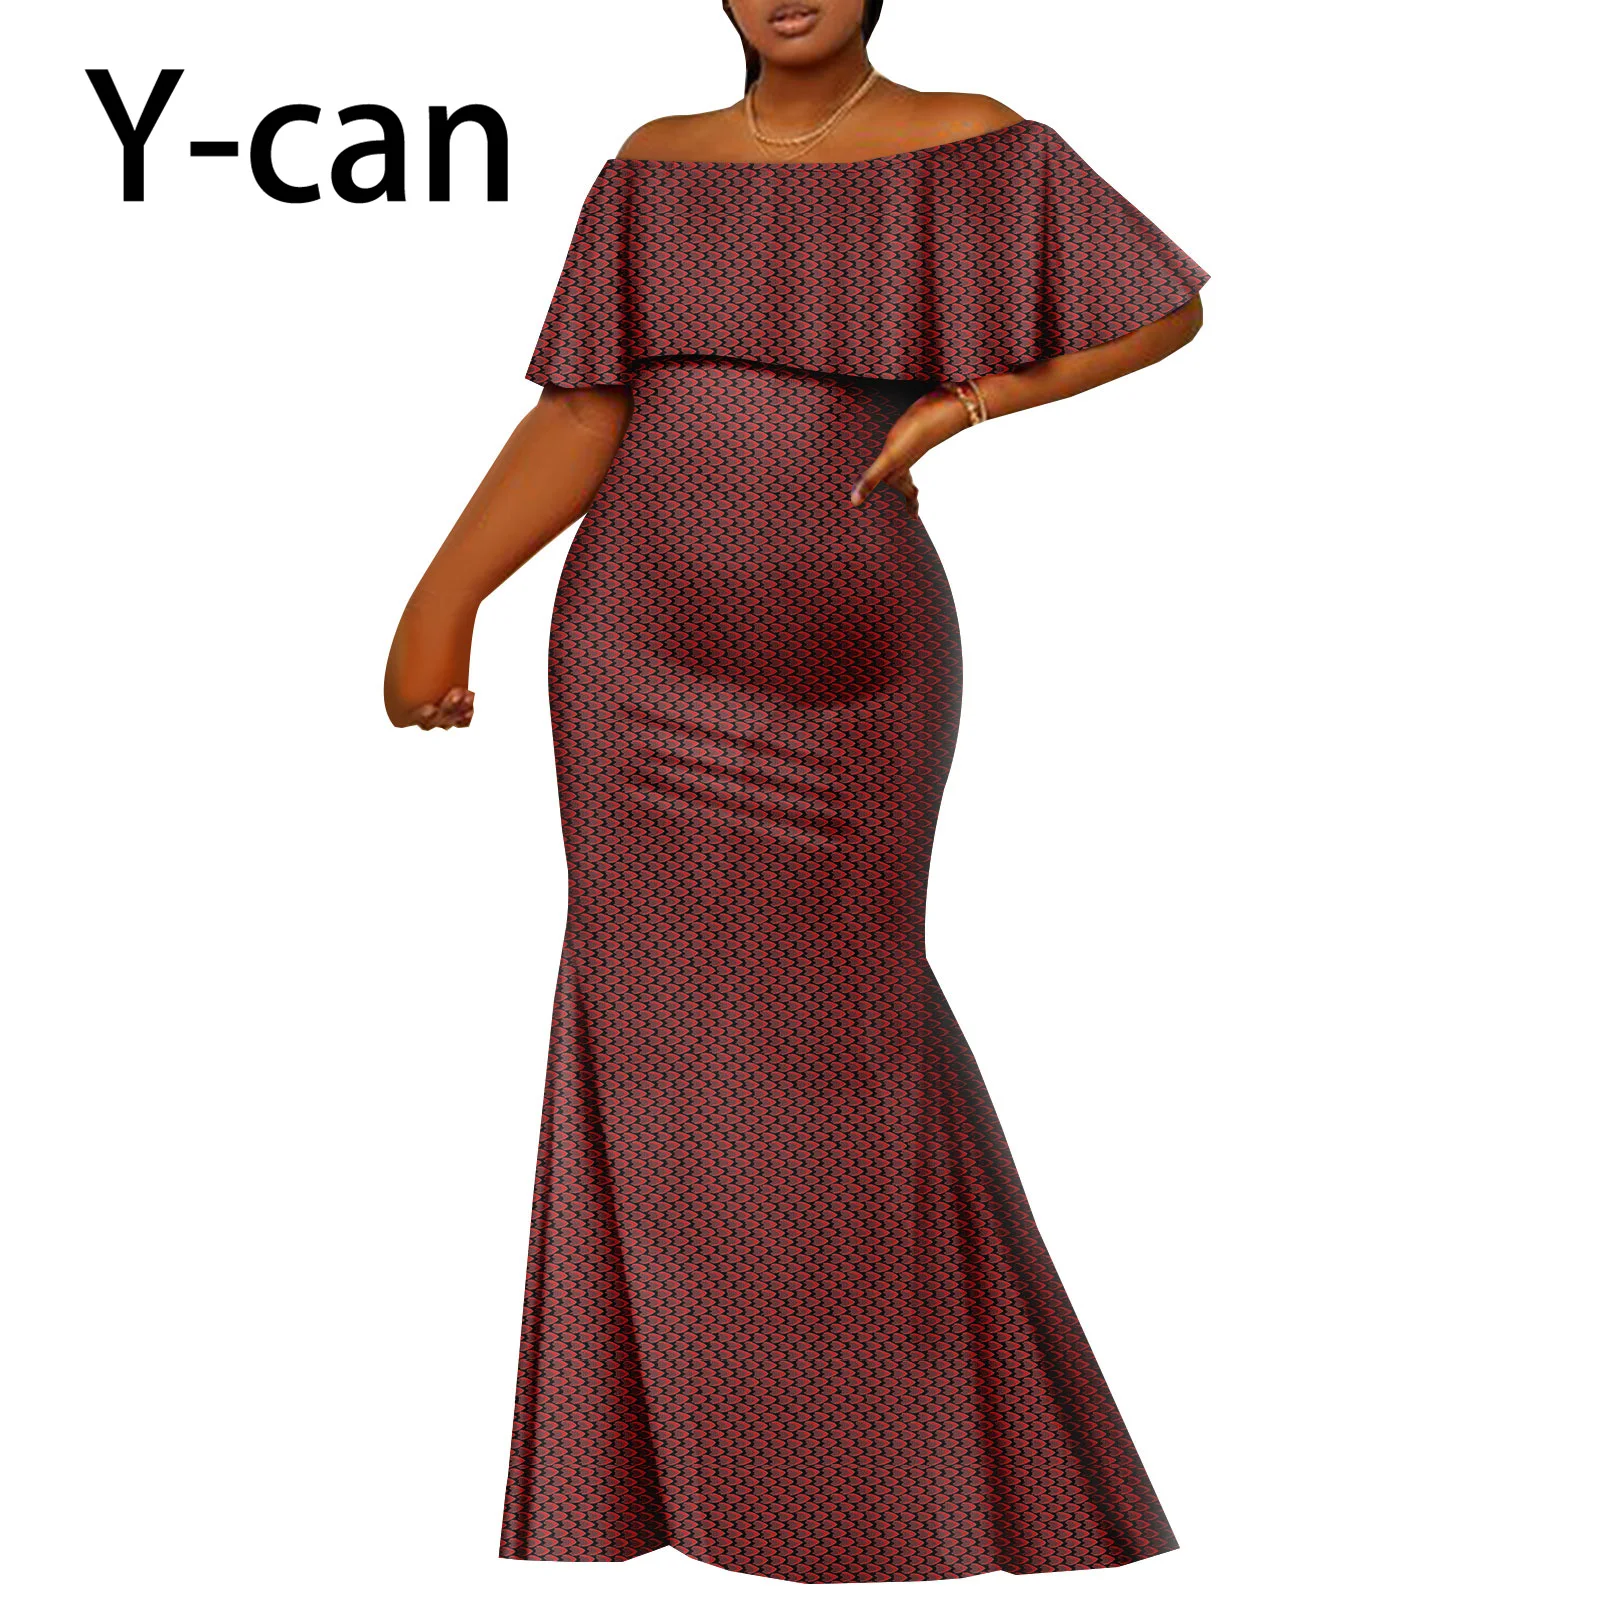 African Dresses for Women Sexy Dresses Dashiki Flower Print Off-shoulder Ruffles Slim Fit Bazin Riche Party Vestidos Y2325080 off shoulder baby blue maternity robes for pregnant women ruffles photo shoot dresses sexy sweep train see thru baby shower gown